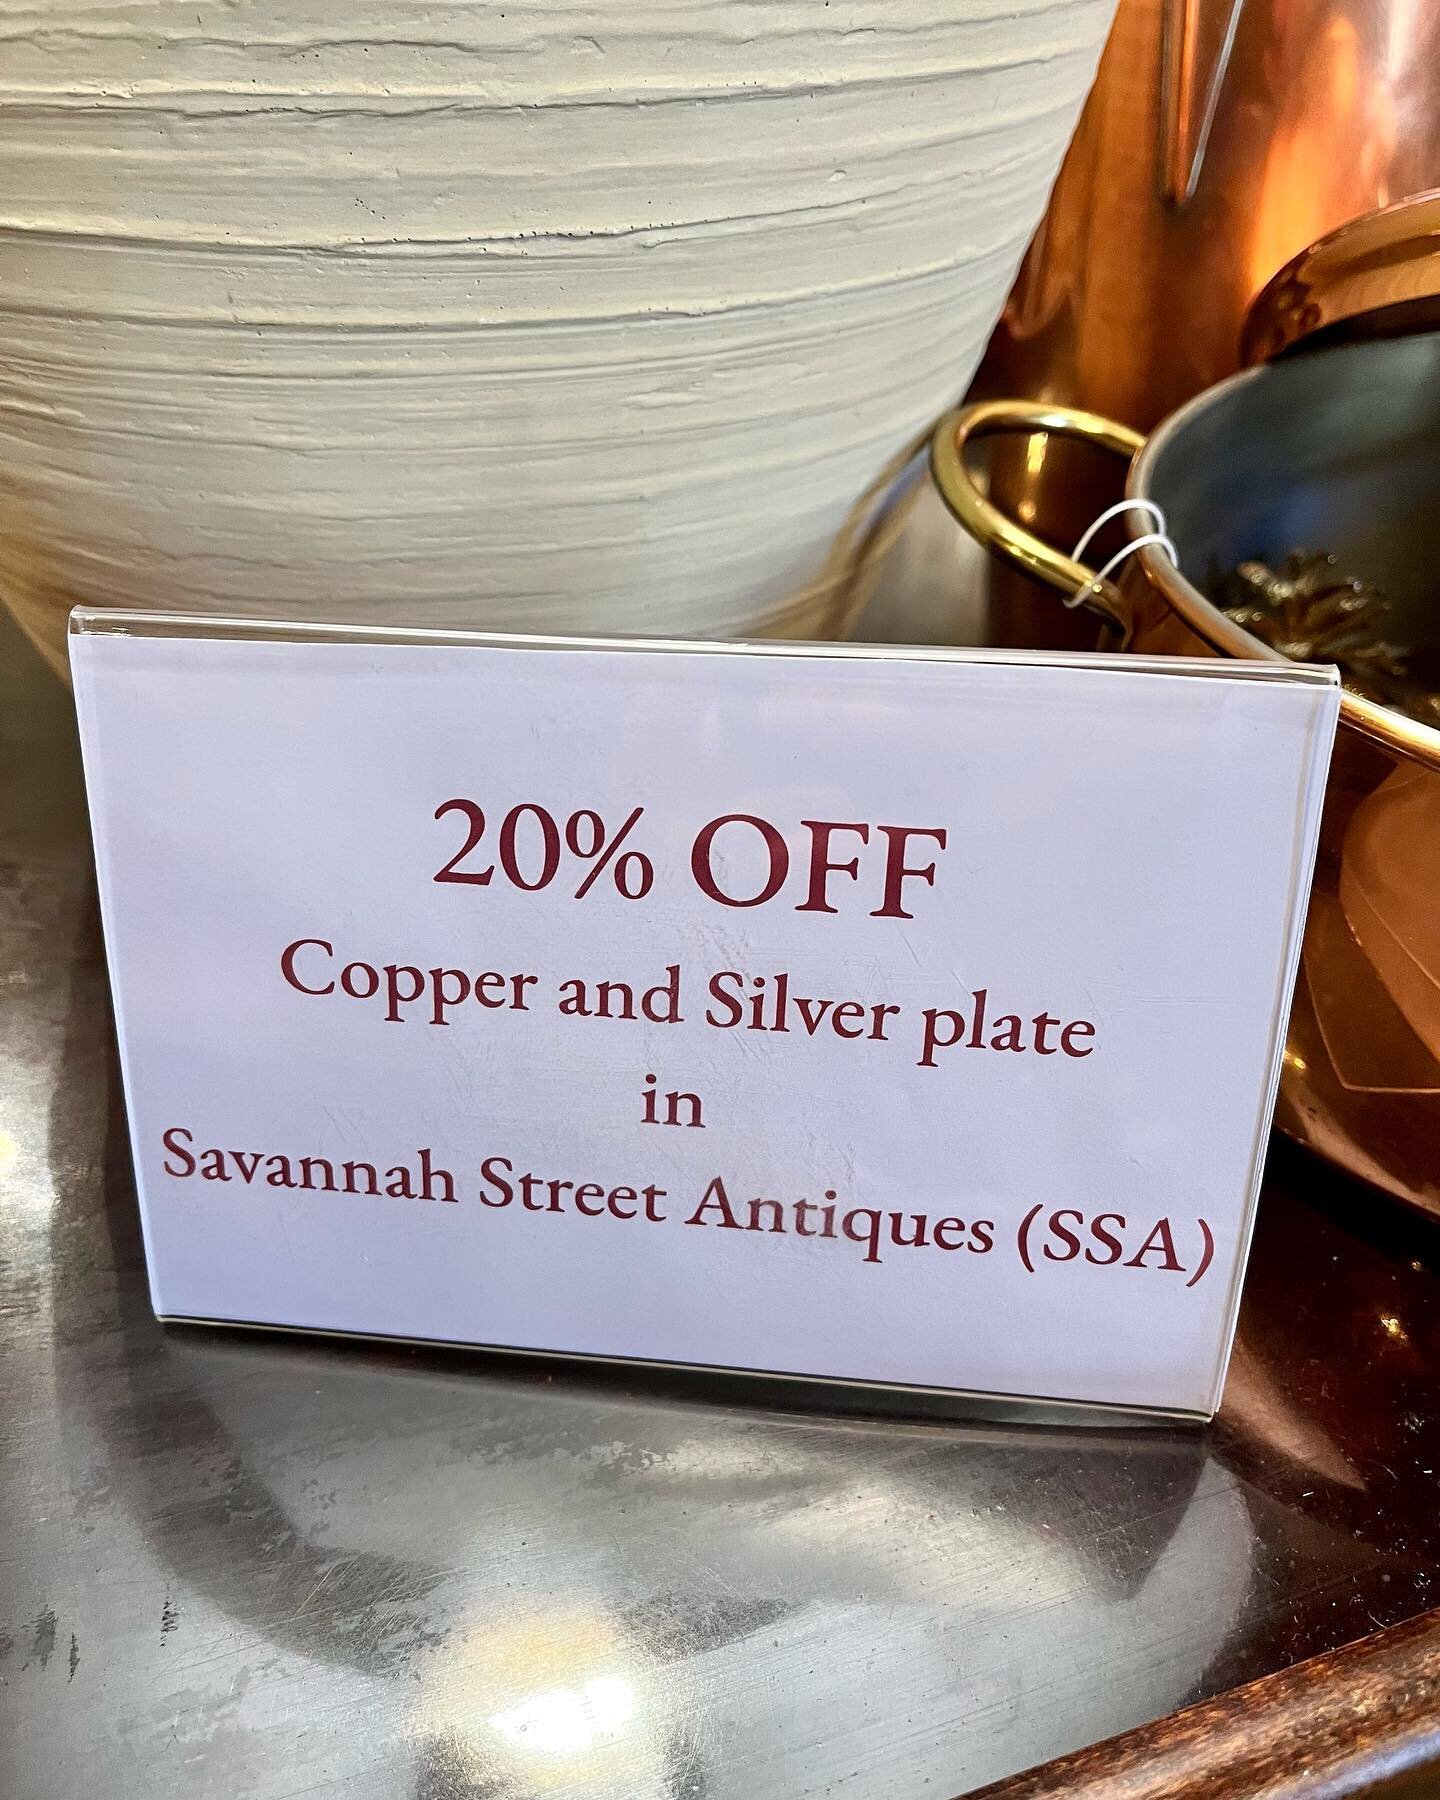 🎄Great for decorating, great for giving! 20% off all copper and silver plate in my booth.